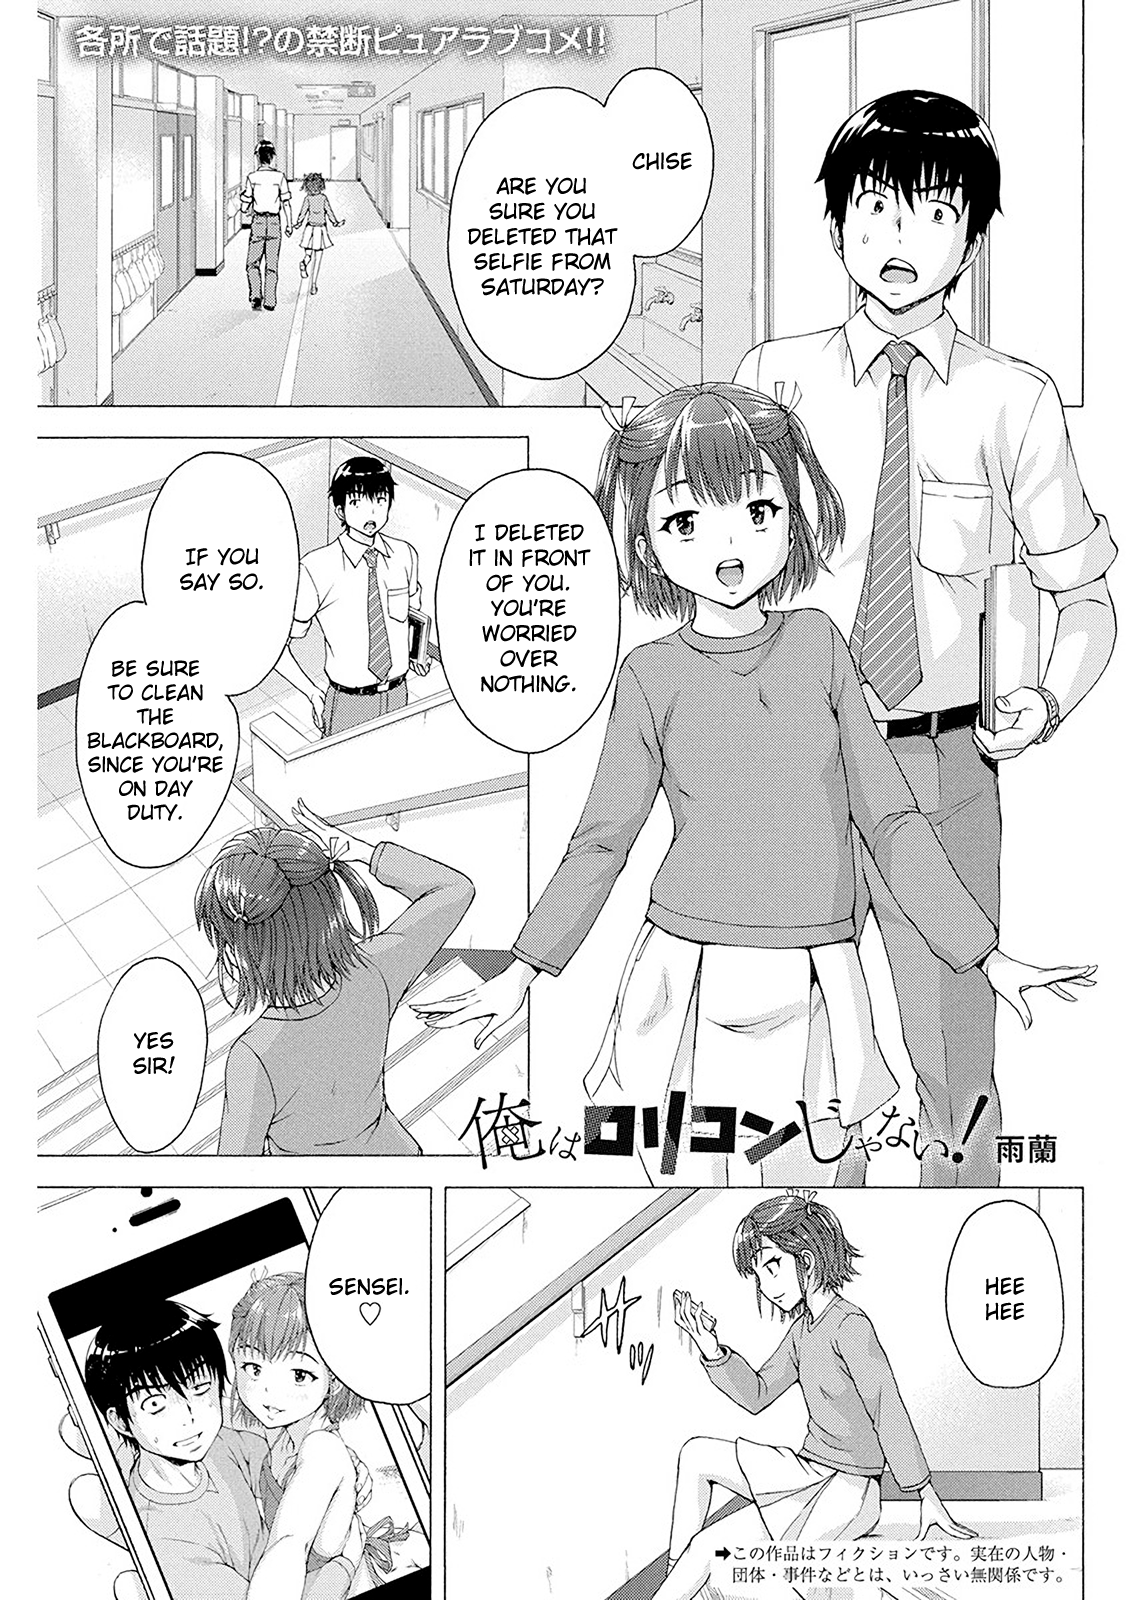 I'm Not A Lolicon! - Page 1